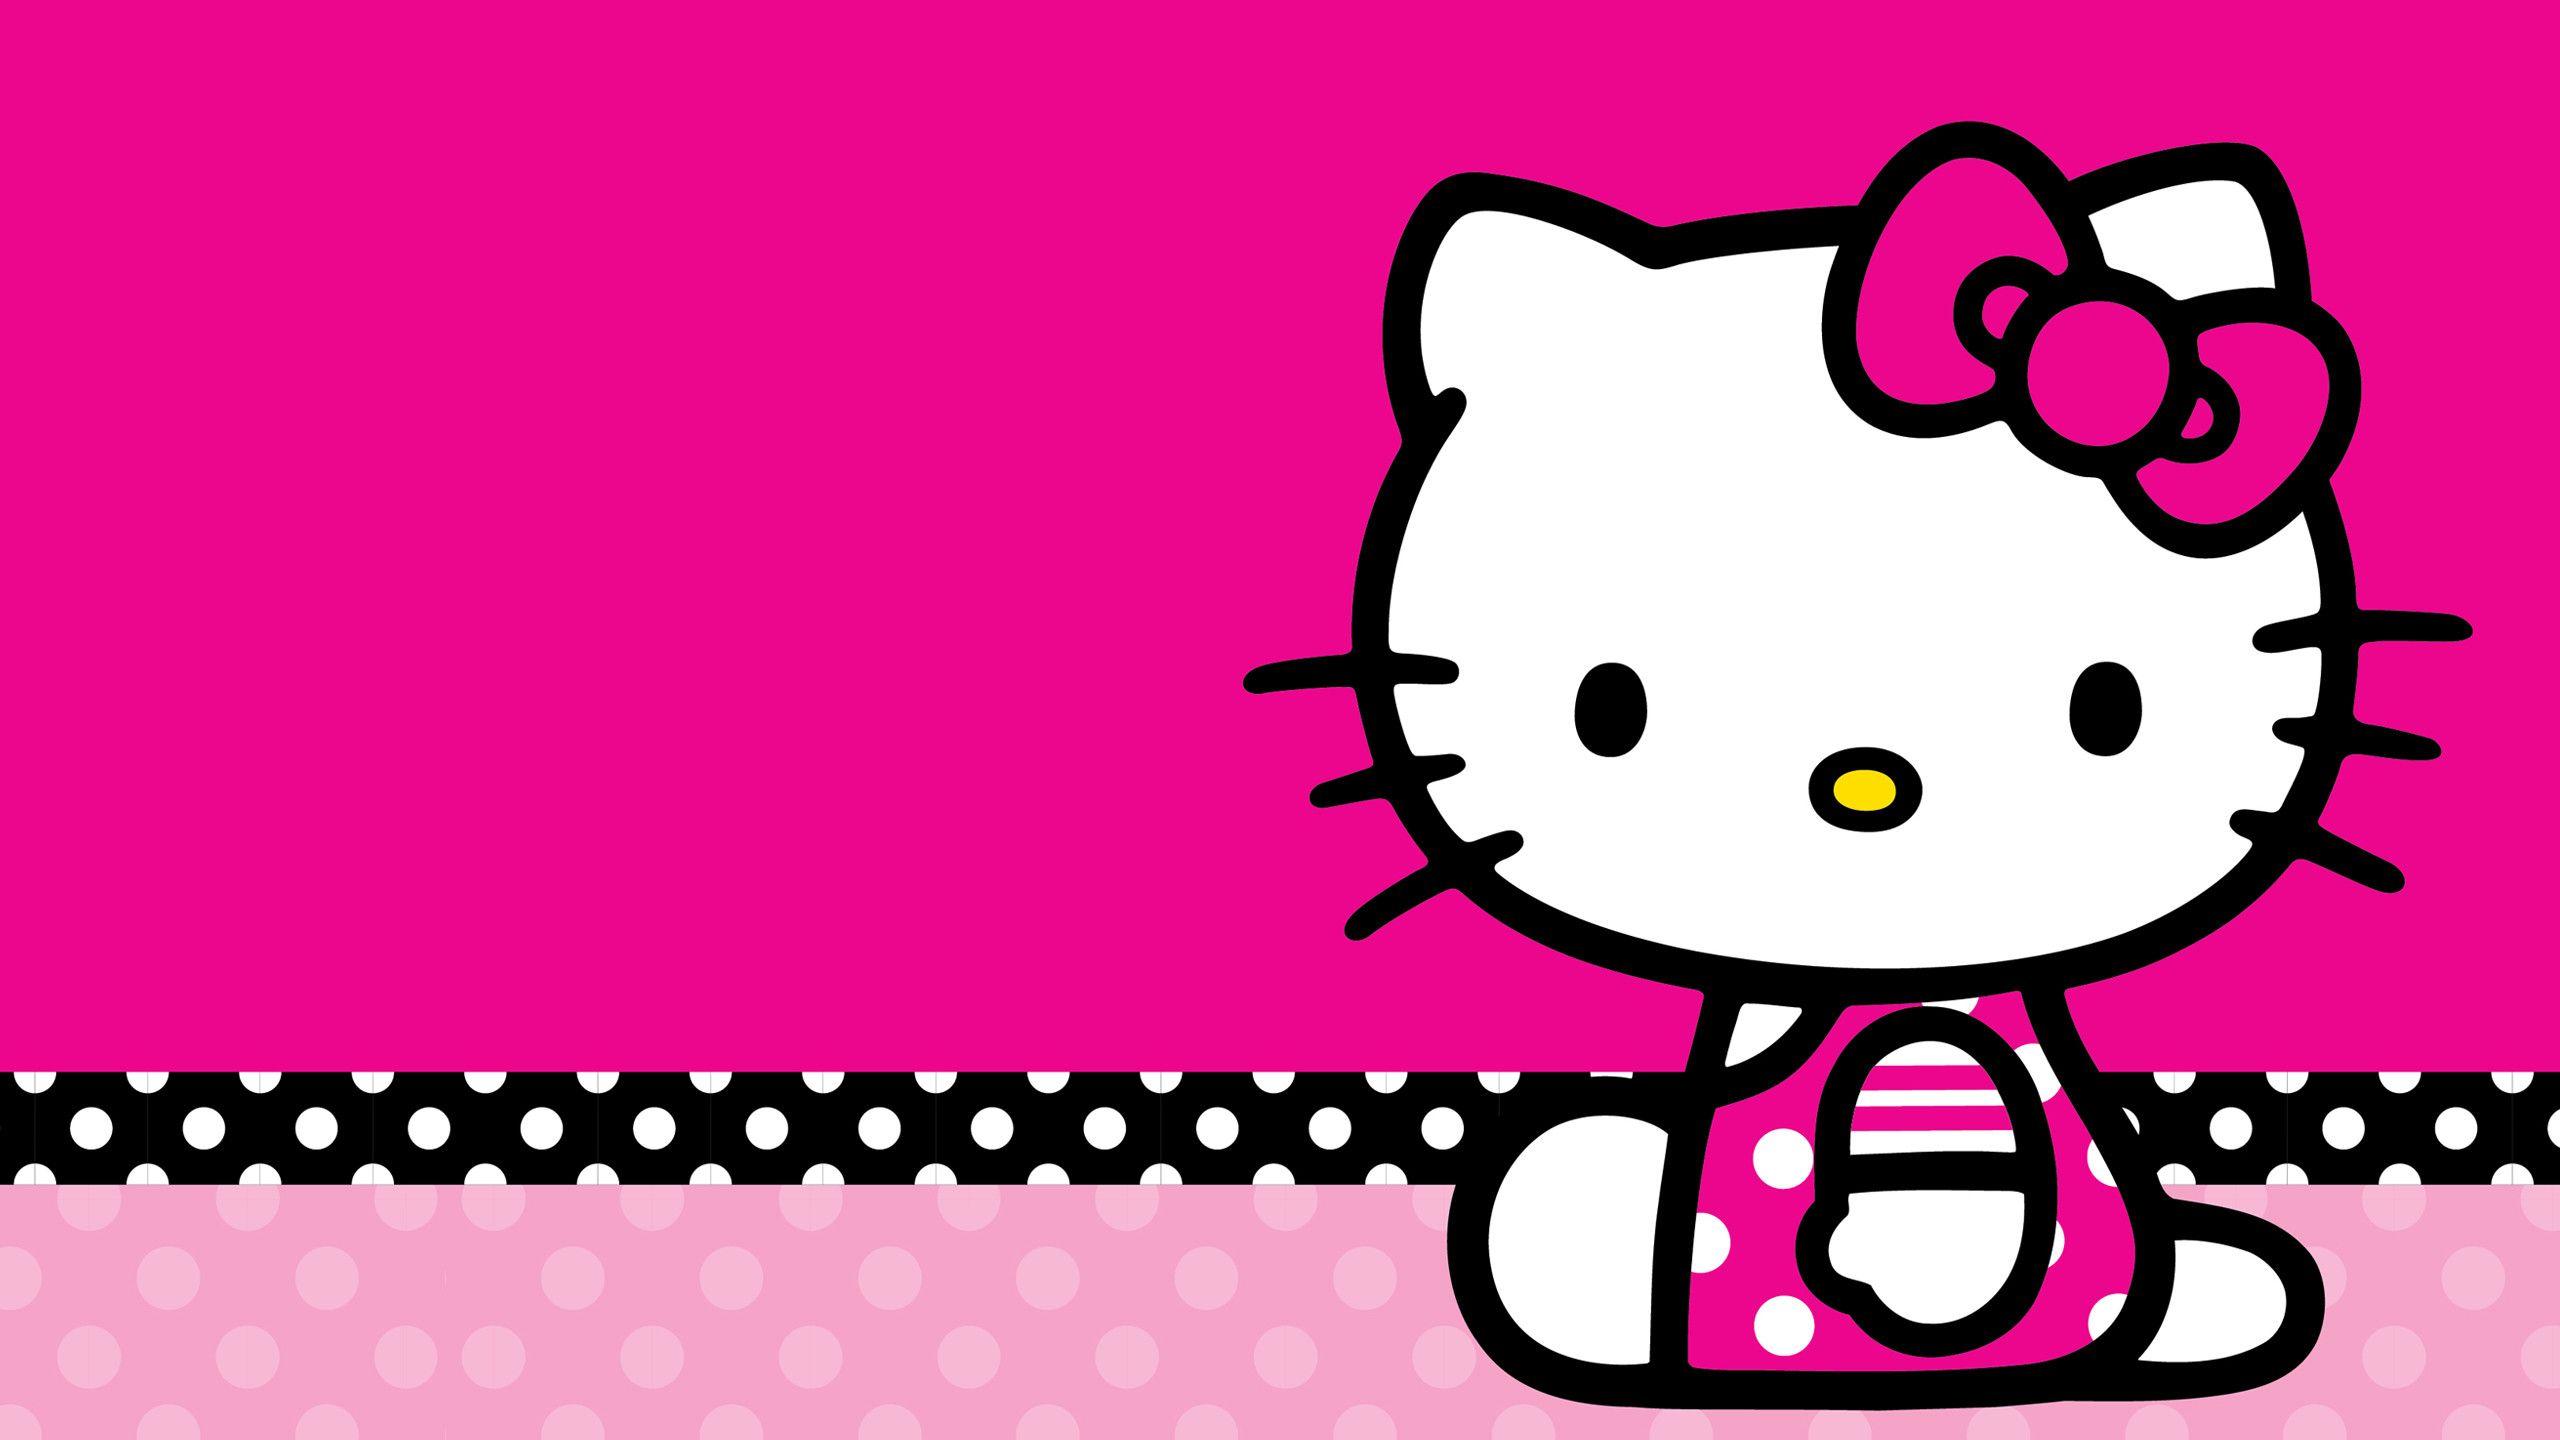 Black and Pink Hello Kitty Wallpapers - Top Free Black and Pink Hello